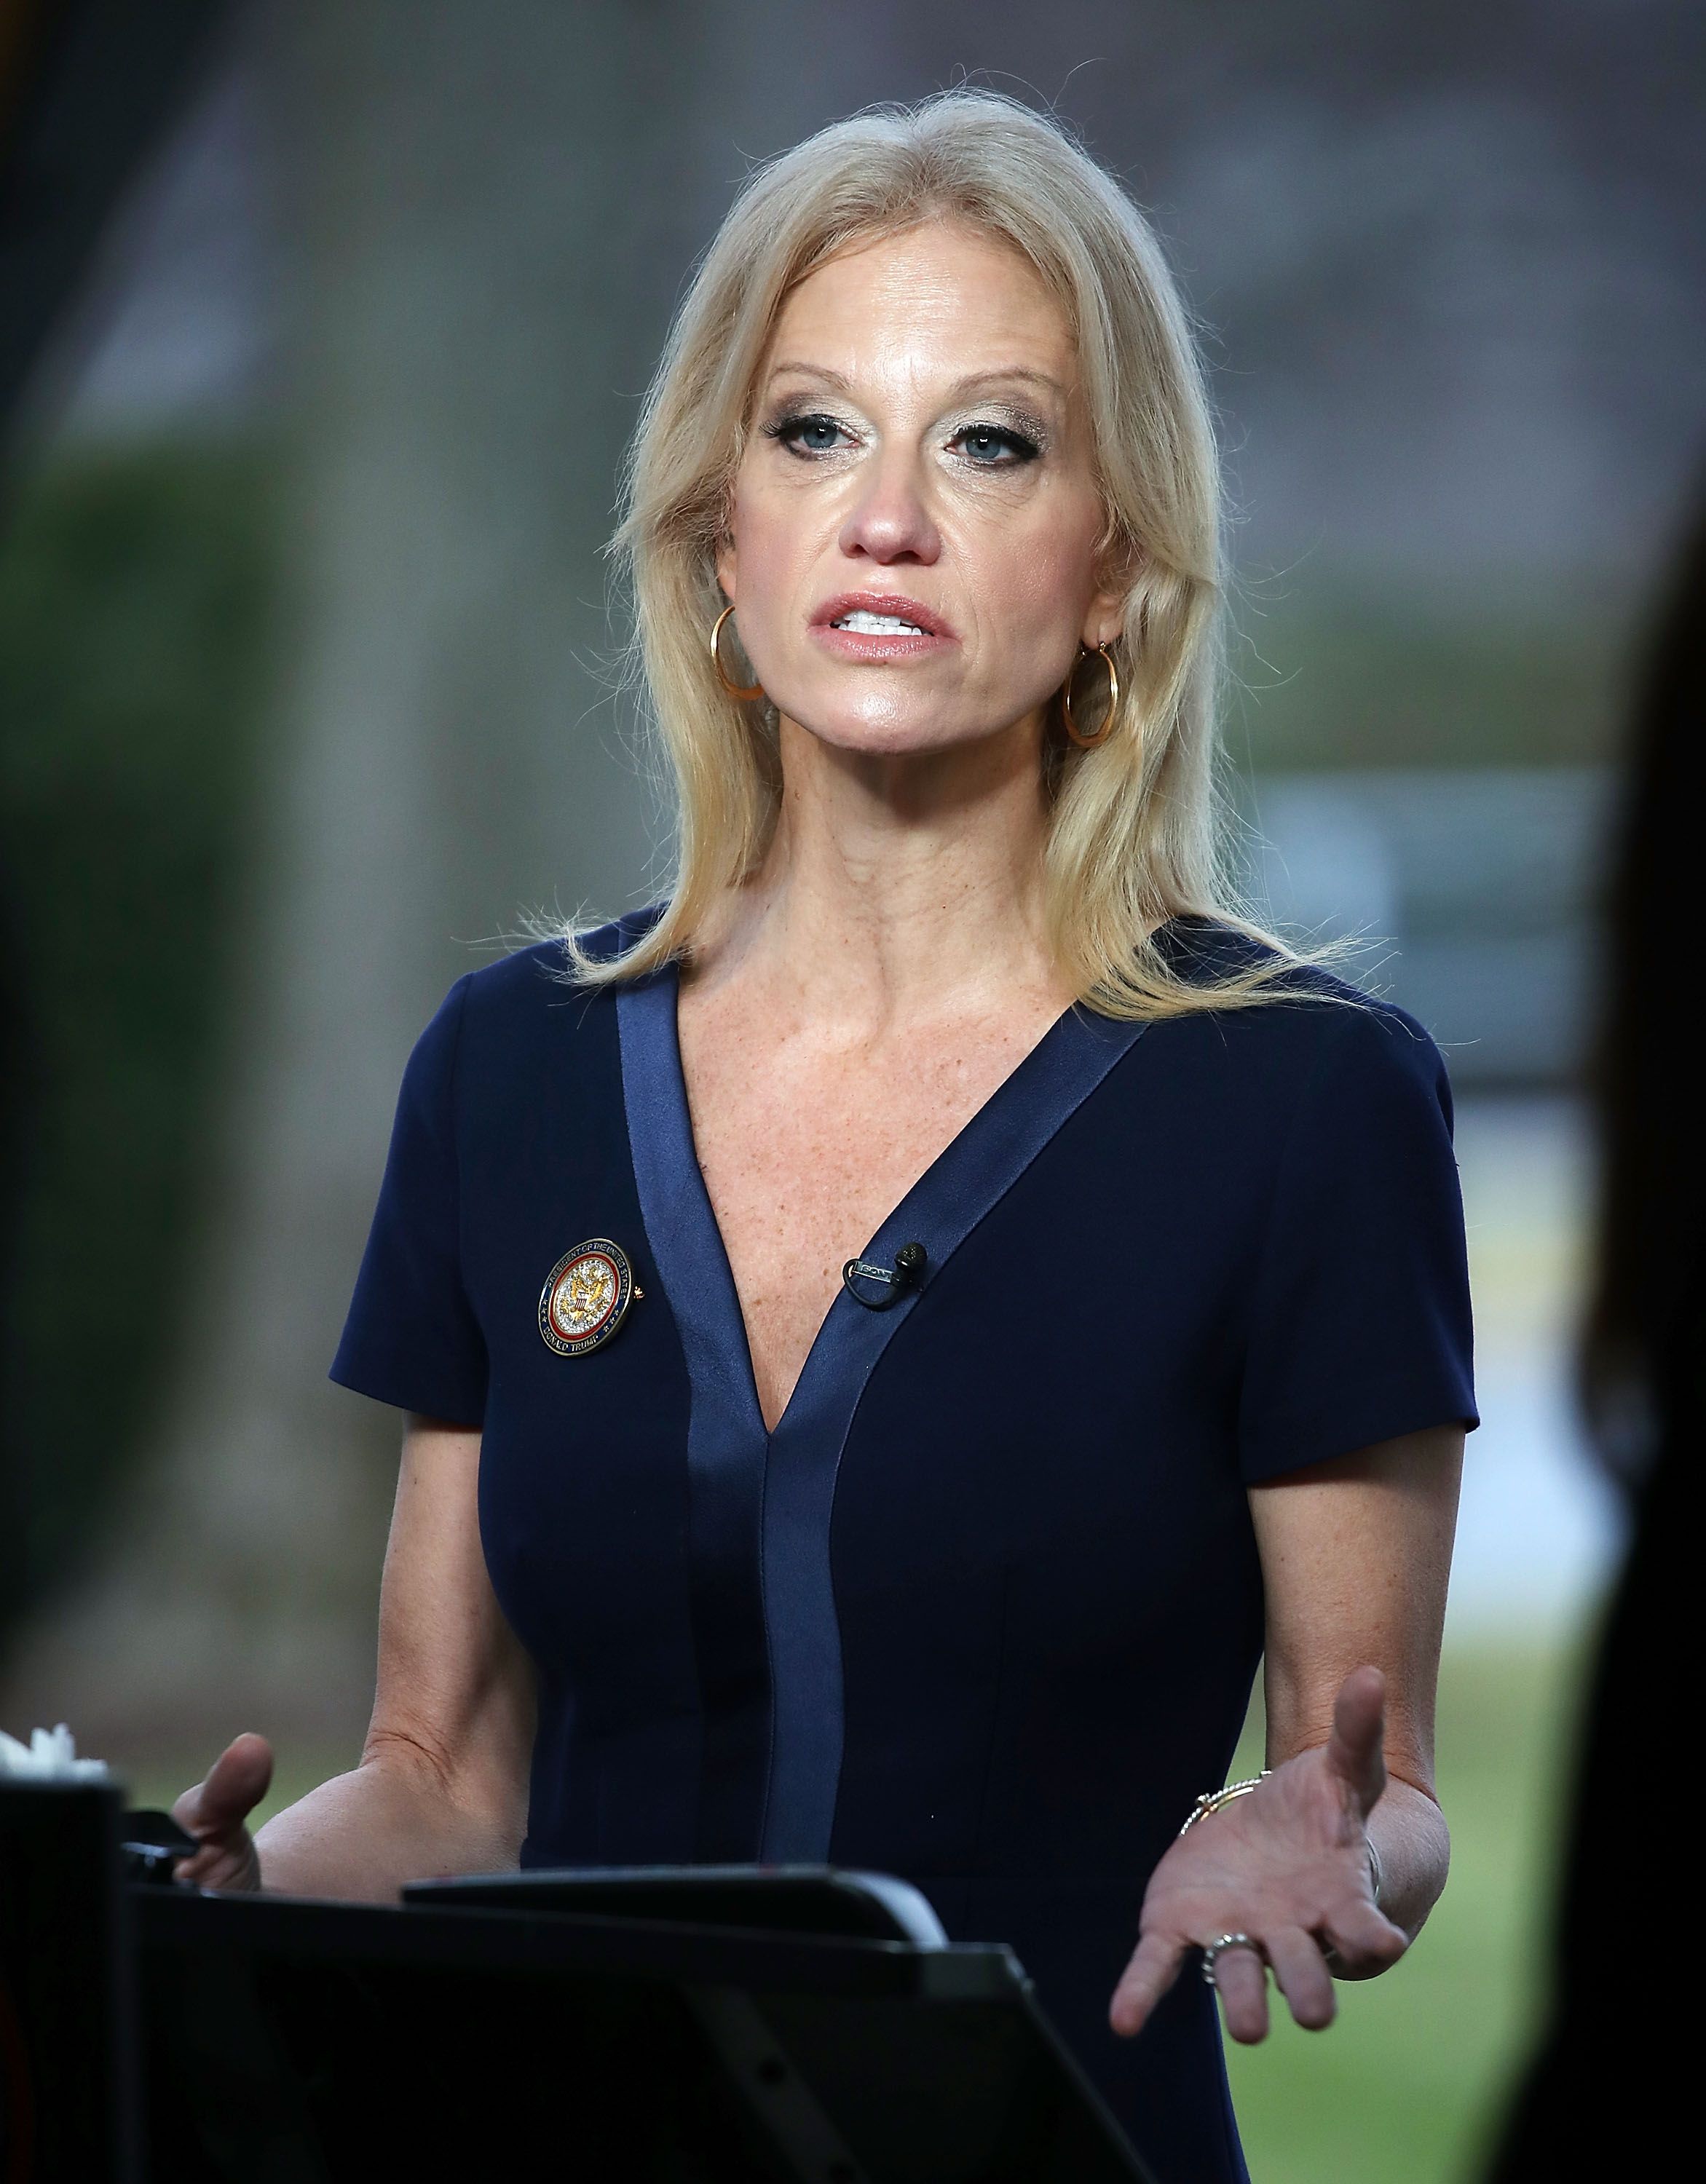 Kellyanne Conway, appears on the Sunday morning show This Week with George Stephanopoulos January 22, 2017 in Washington, DC | Photo: Getty Images